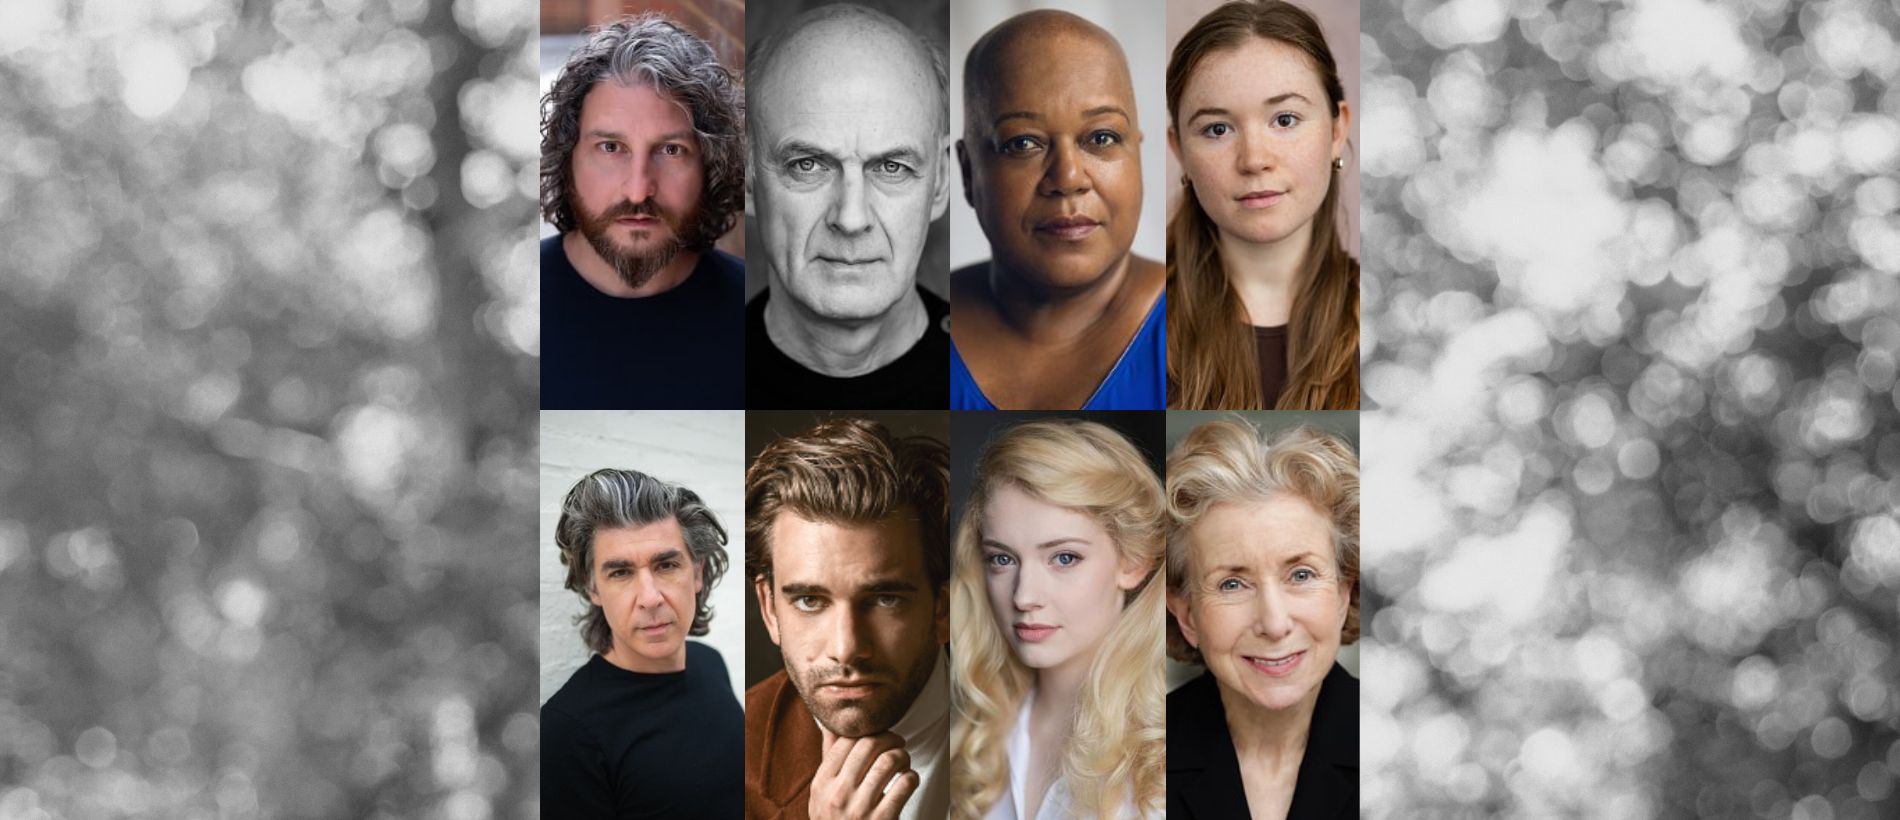 A collection of eight headshots arranged in a grid of the cast of Uncle Vanya. On the top row from left to right is displayed: David Ahmad, William Chubb, Juliet Garricks , and Madeleine Gray. On the bottom row from left to right is displayed: James Lance, Andrew Richardson, Lily Sacofsky, and Susan Tracy.